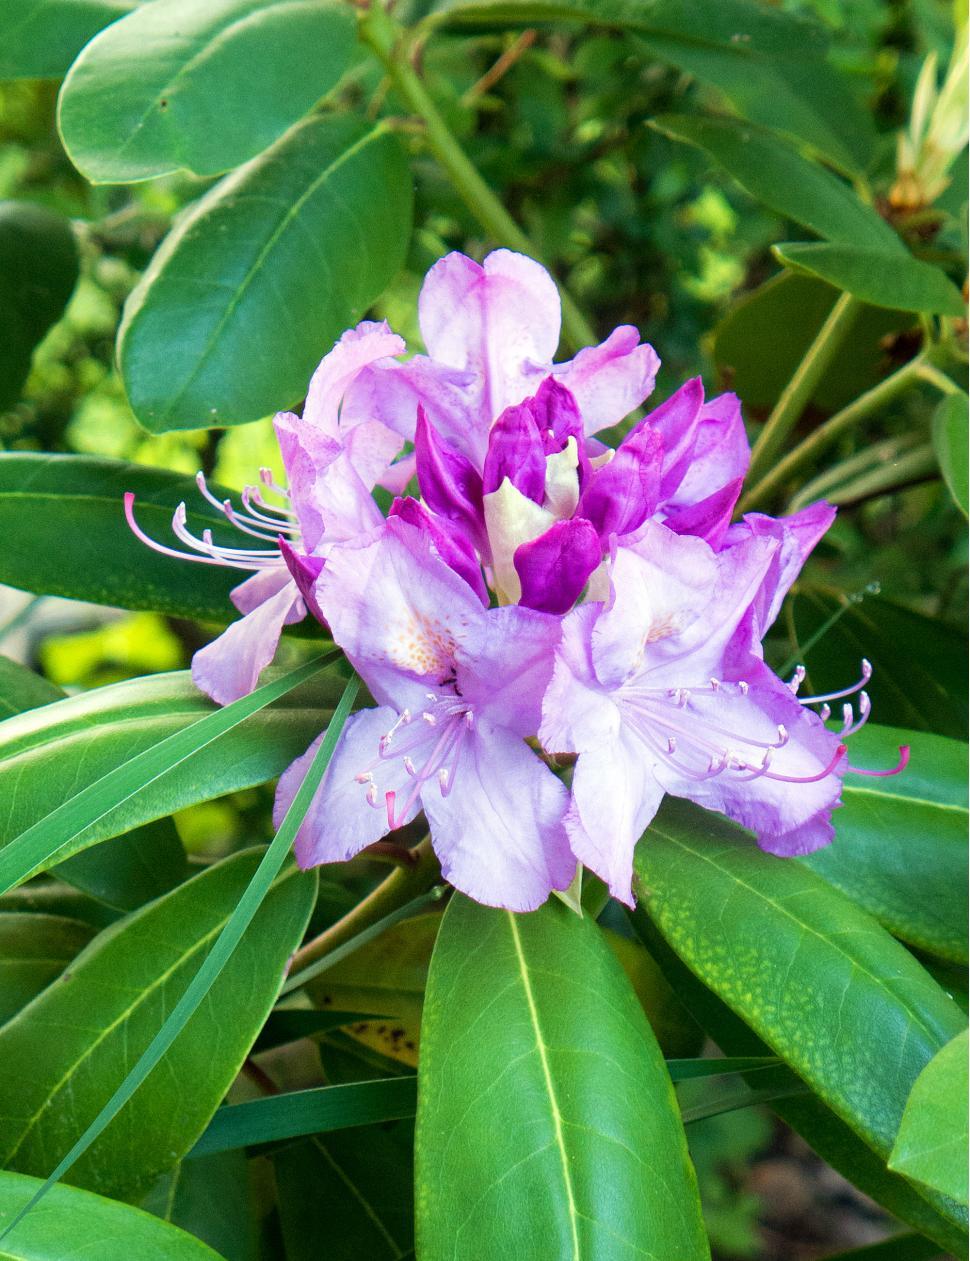 Free Image of Pink Rhododendron Blooms 